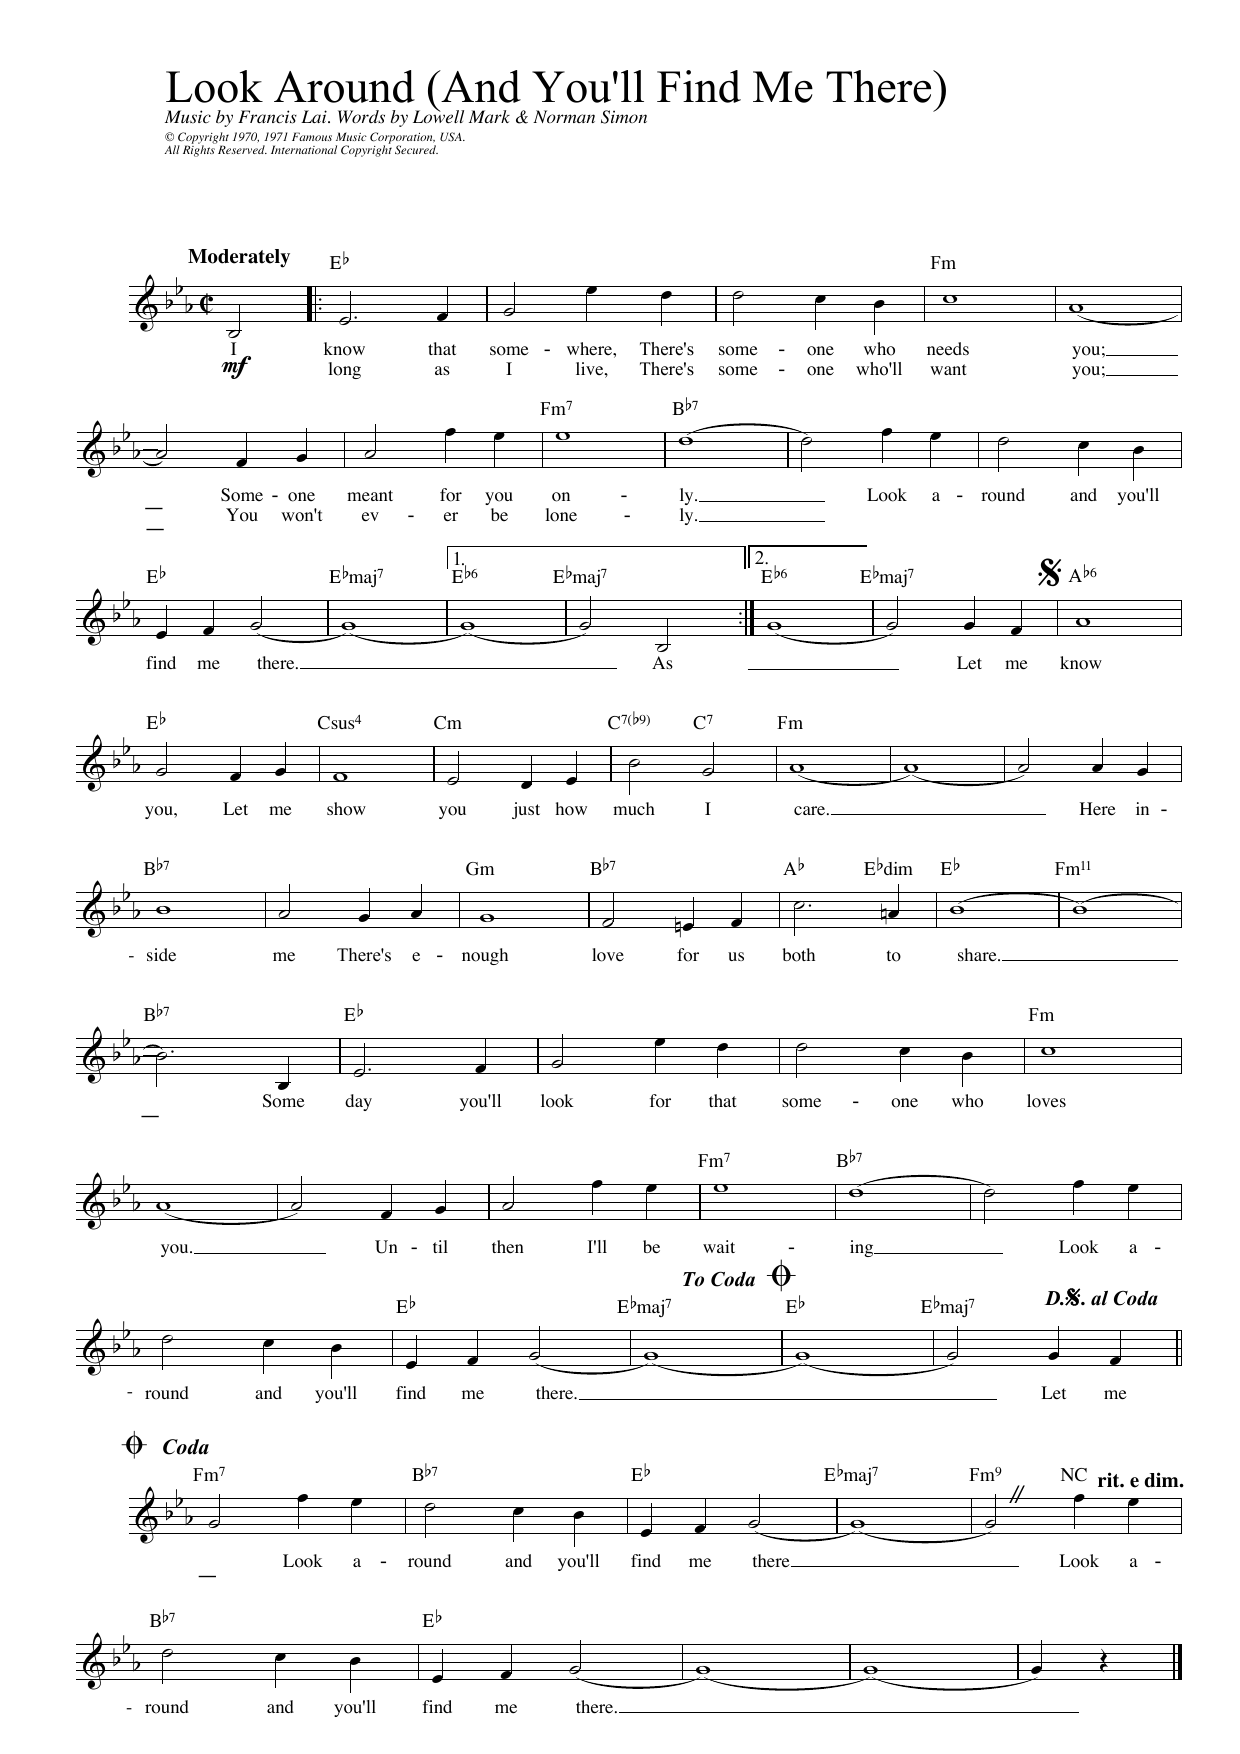 Francis Lai Look Around (And You'll Find Me There) (from Love Story) sheet music notes printable PDF score